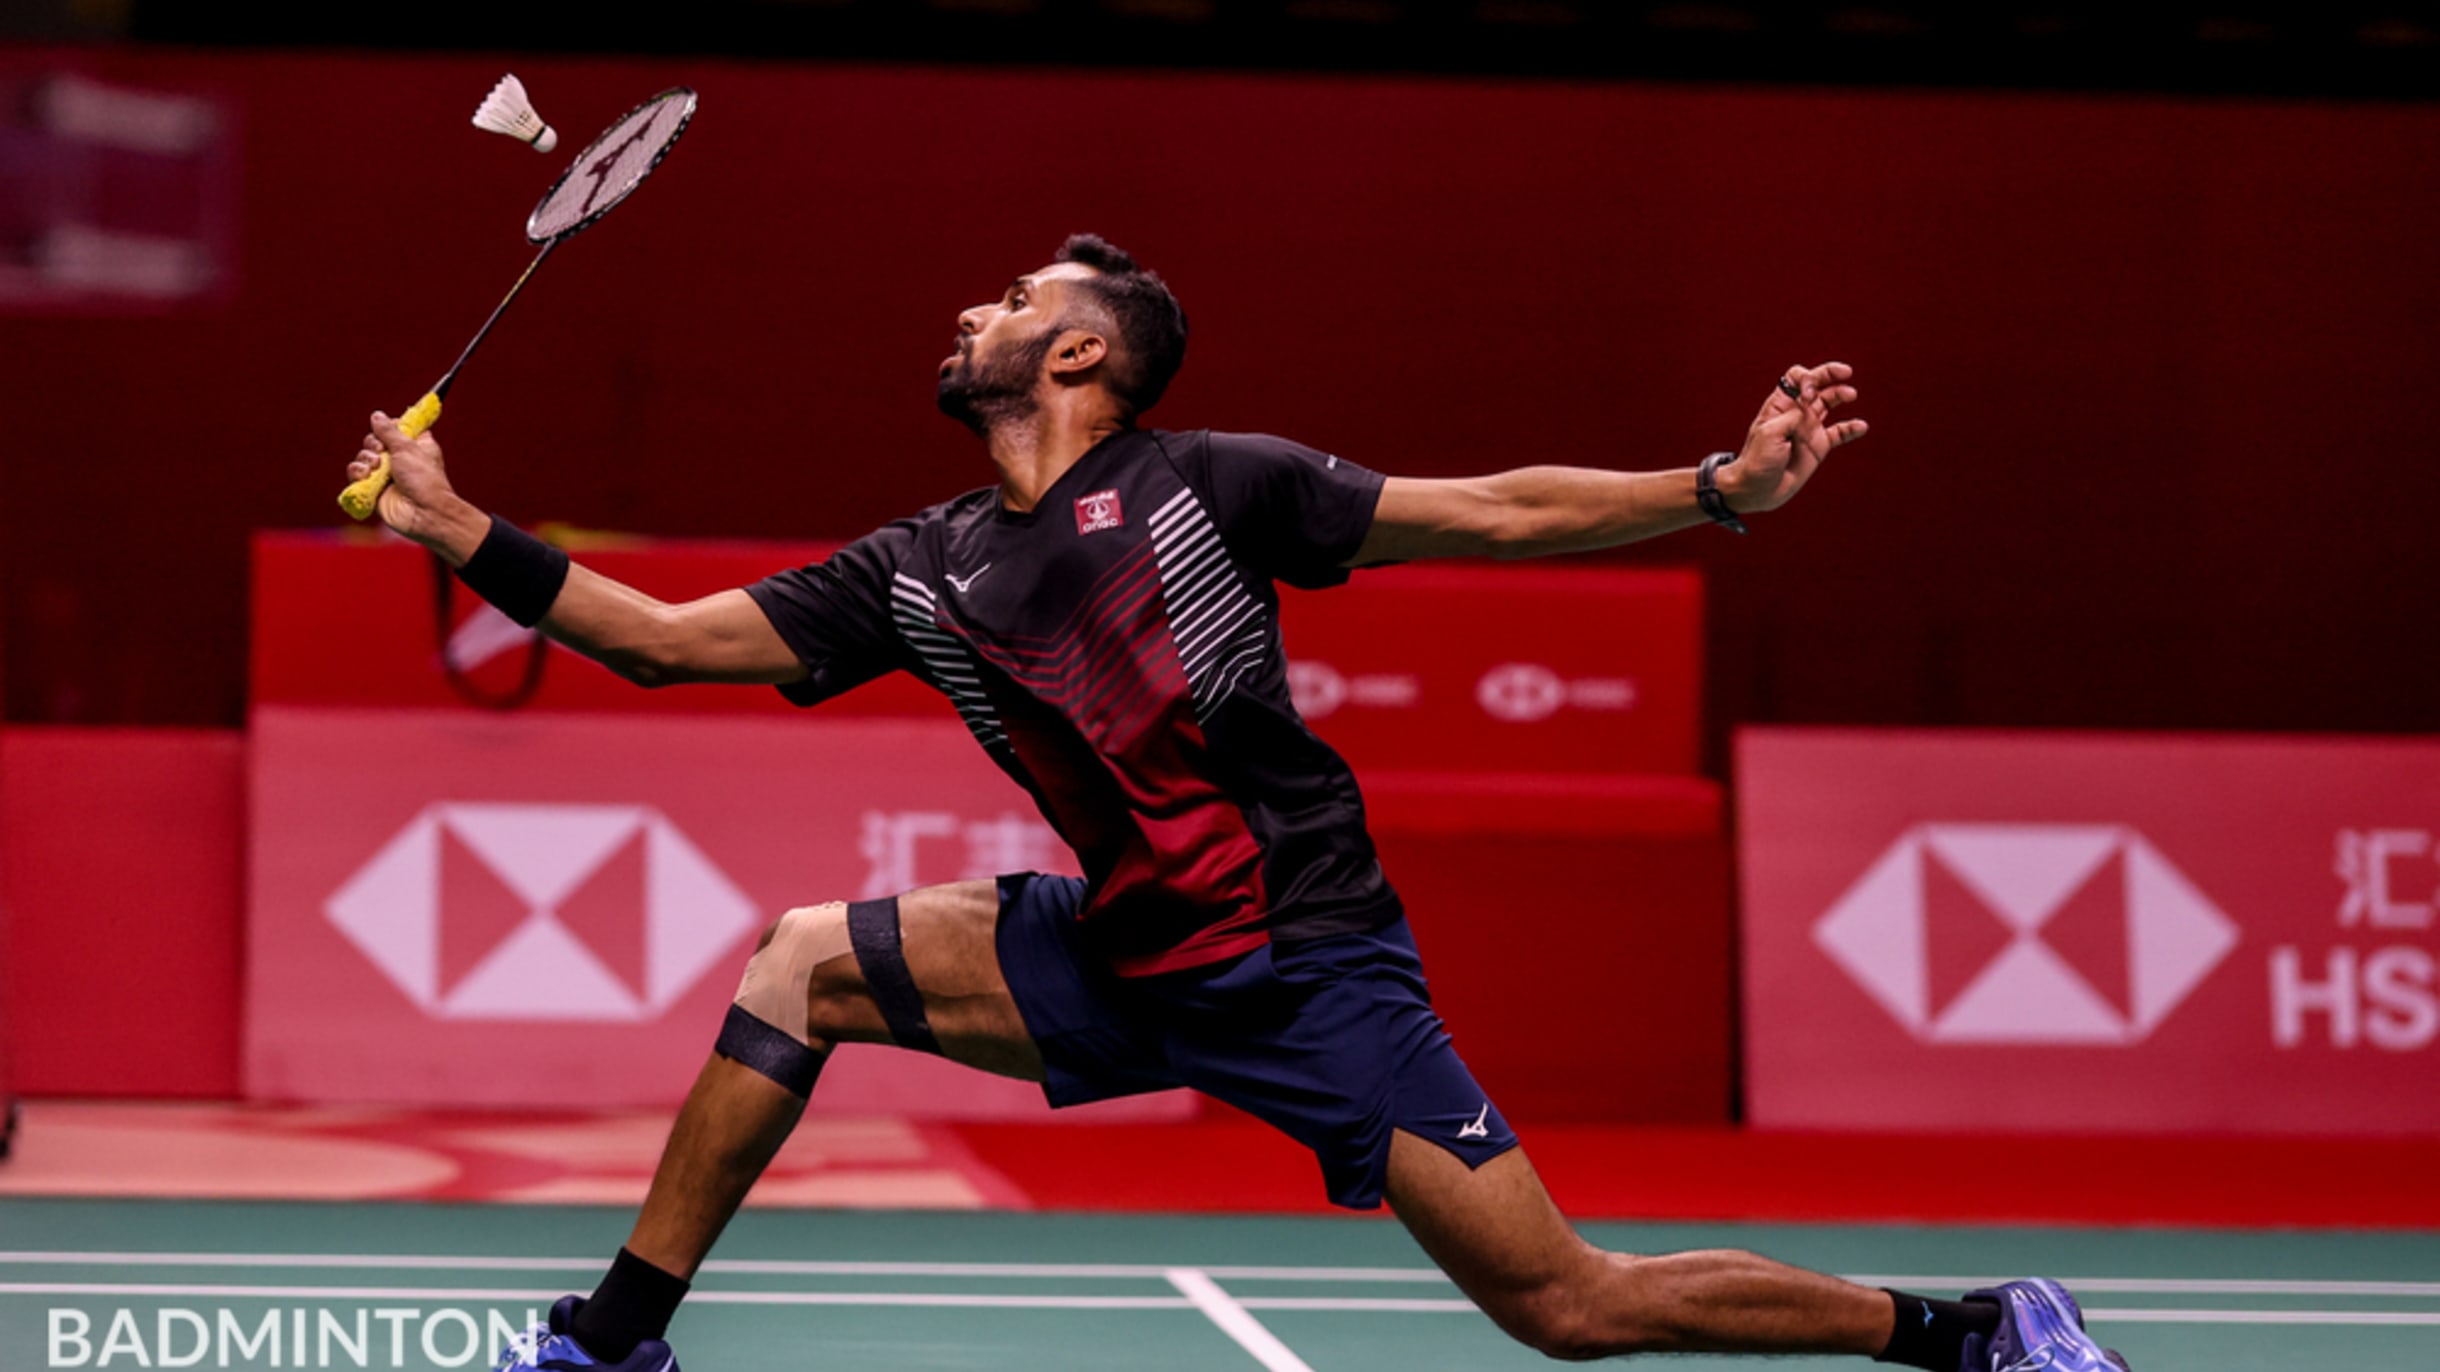 BWF World Tour Finals 2022 HS Prannoy vs Lu Guang Zu scores and result